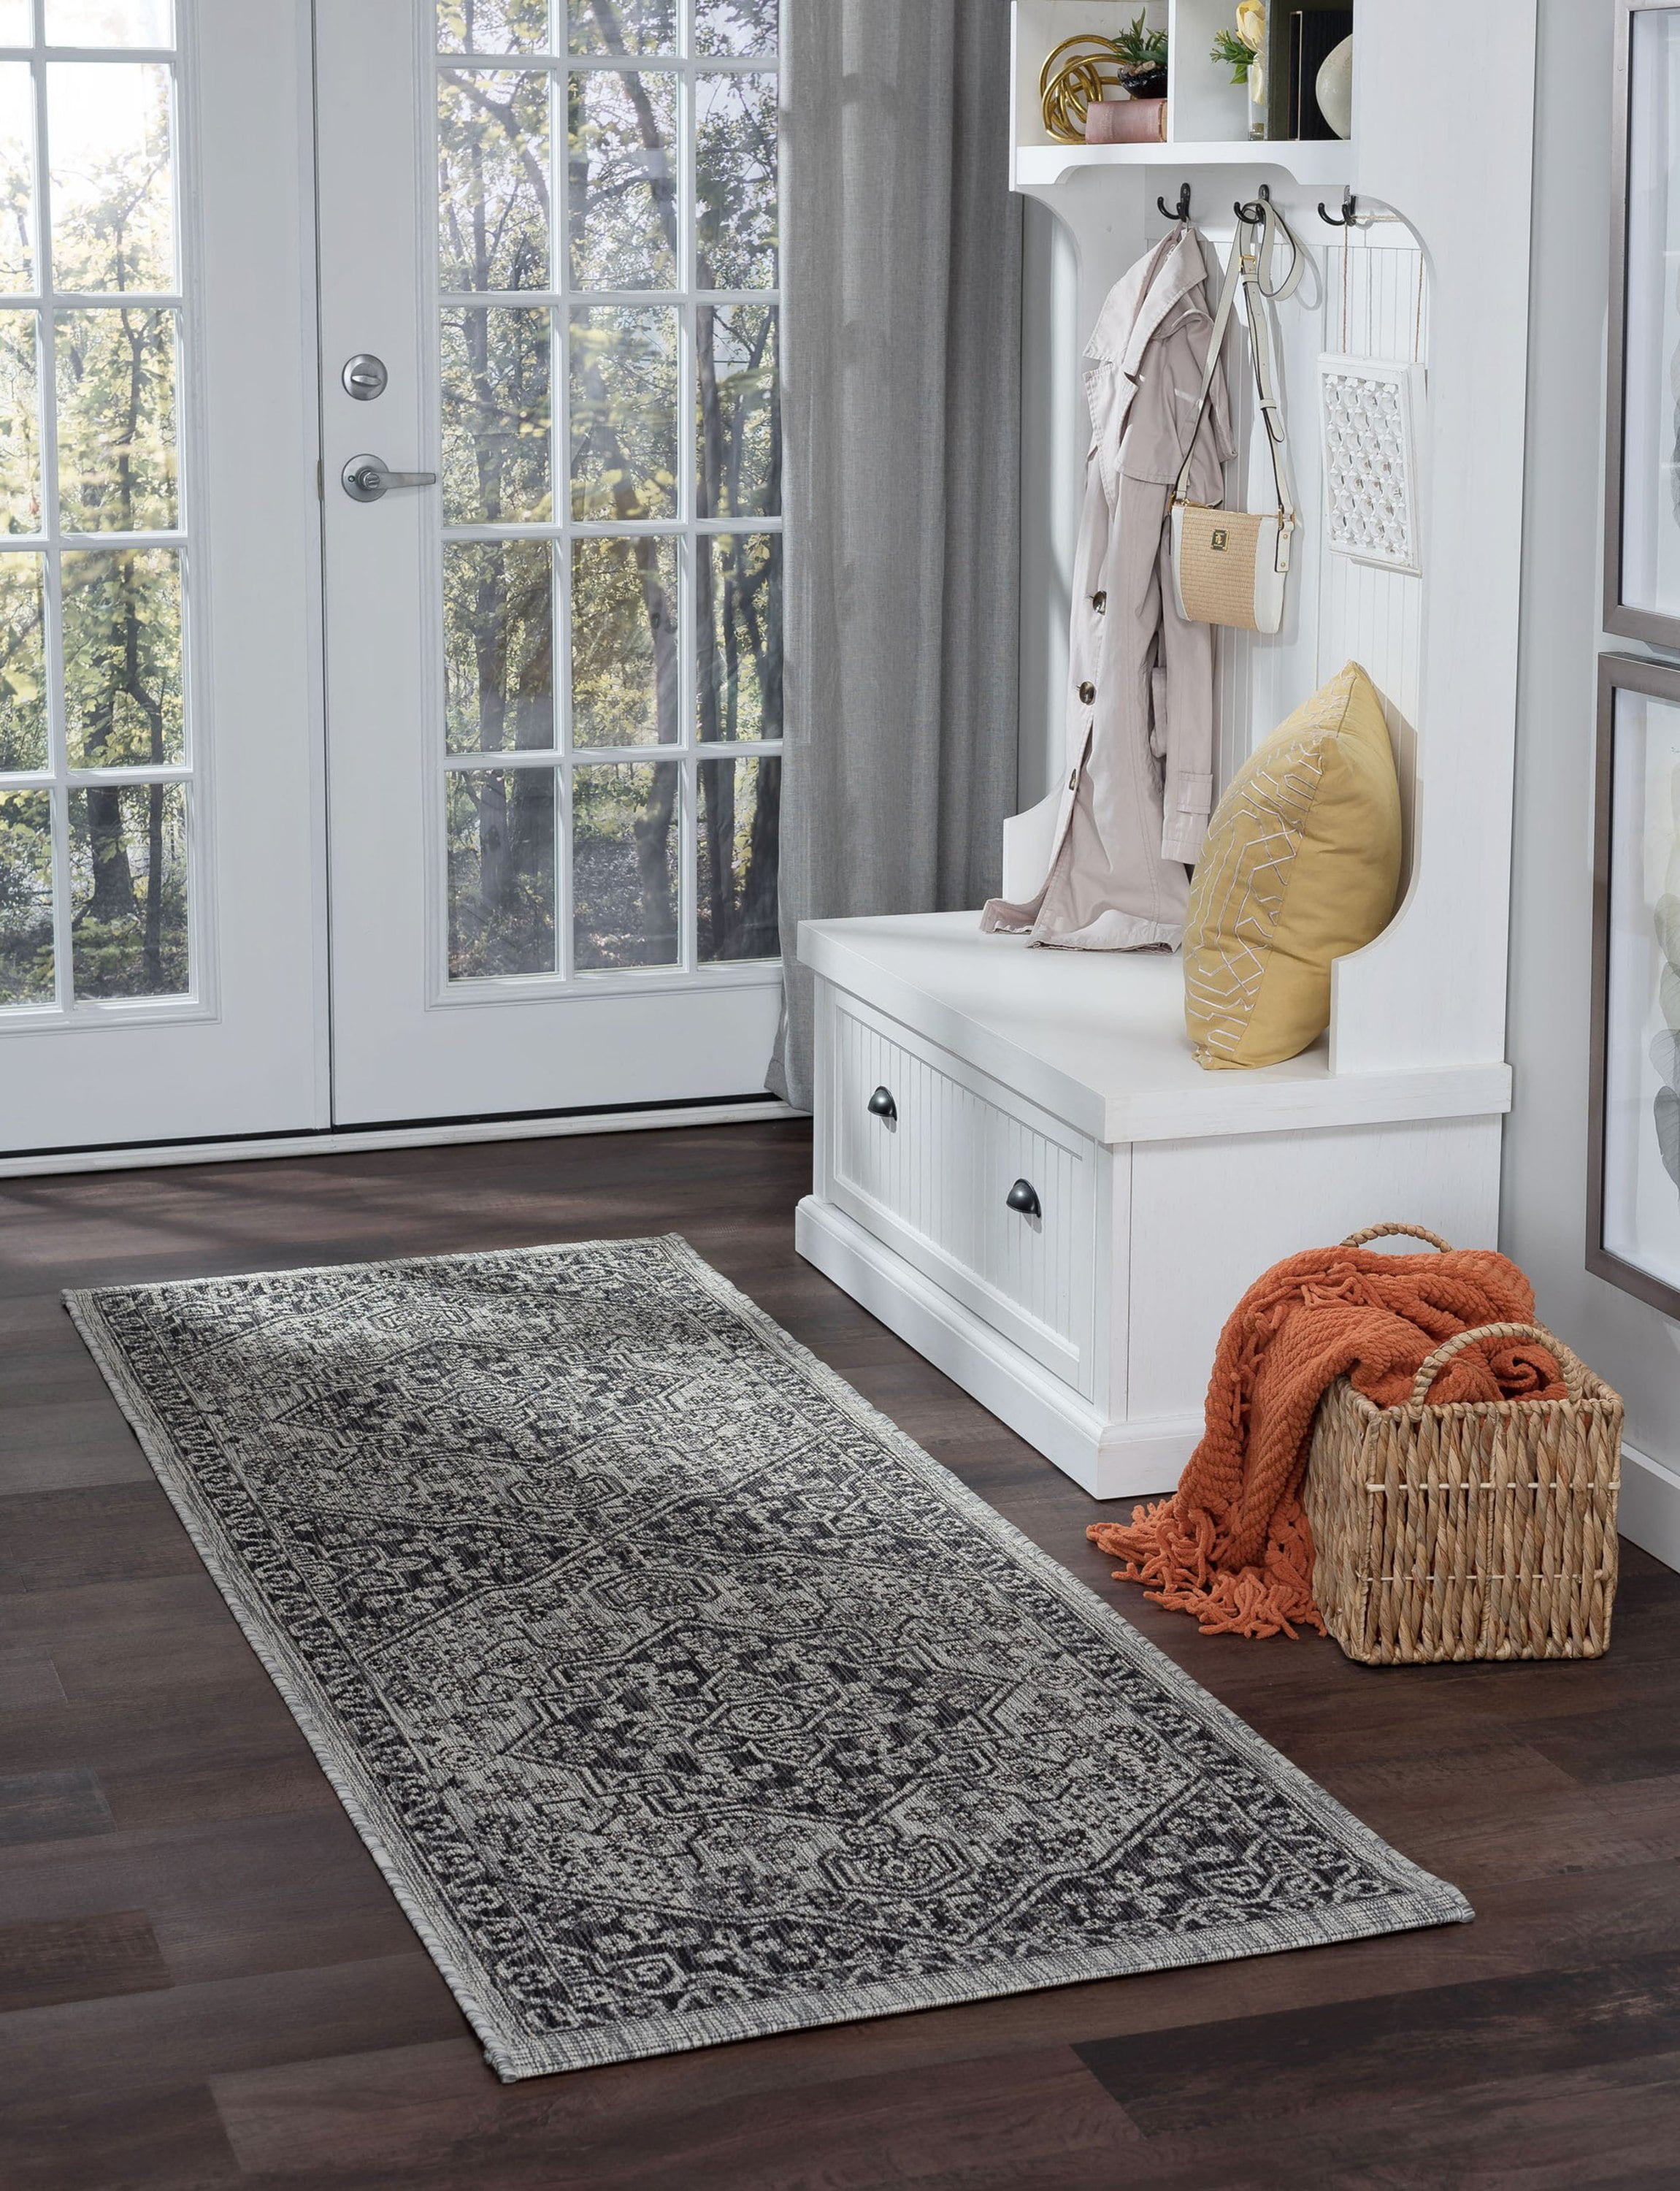 KITCHEN RUGS CARPET AREA RUG RUNNERS OUTDOOR CARPET WHITE GRAY